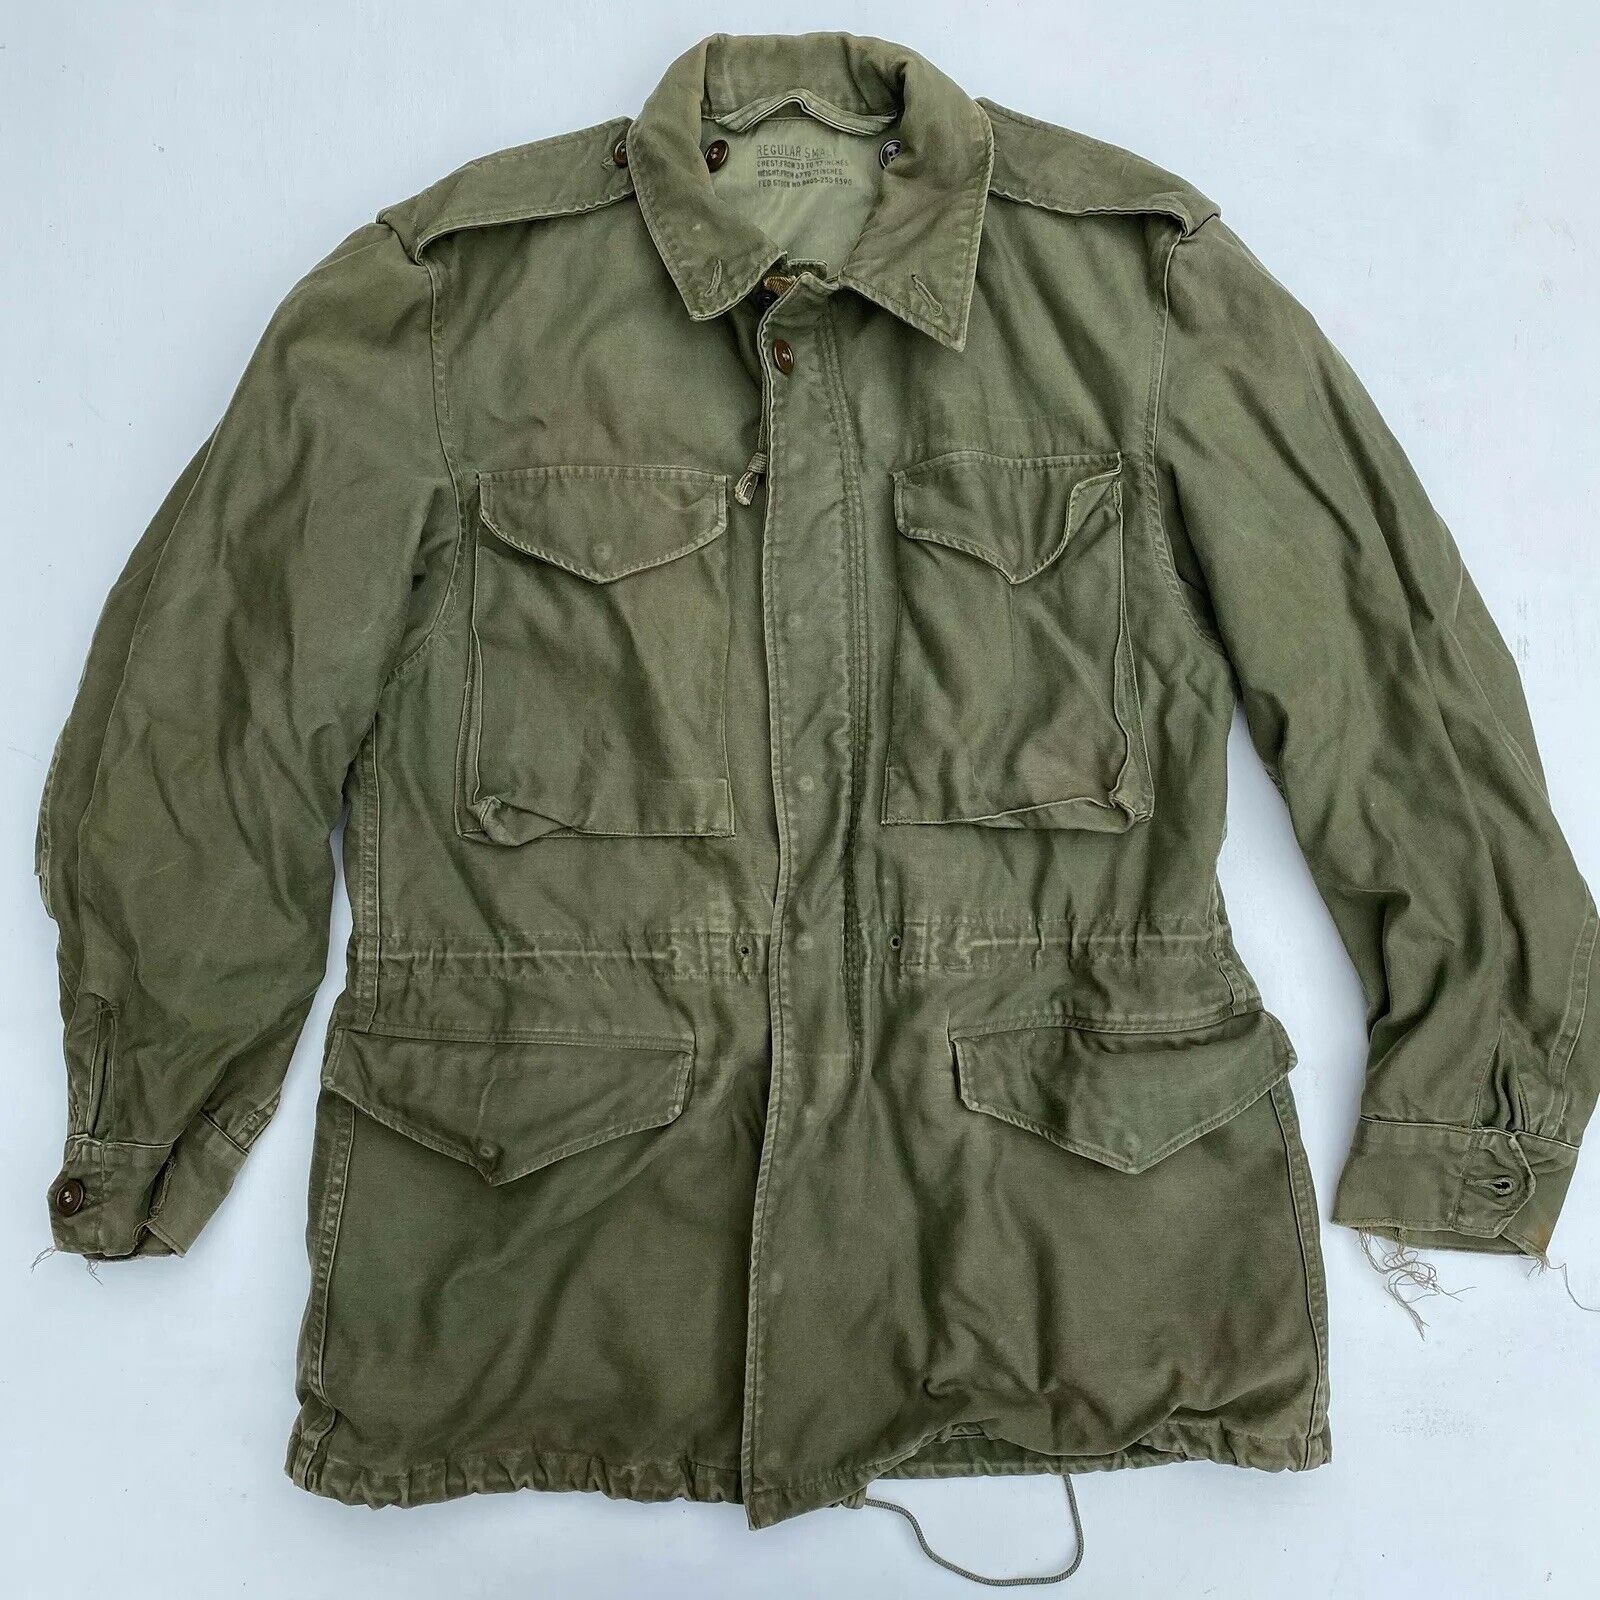 Vintage WWII Jacket Military M-1943 M43 US Army Field Parks Small 1940s